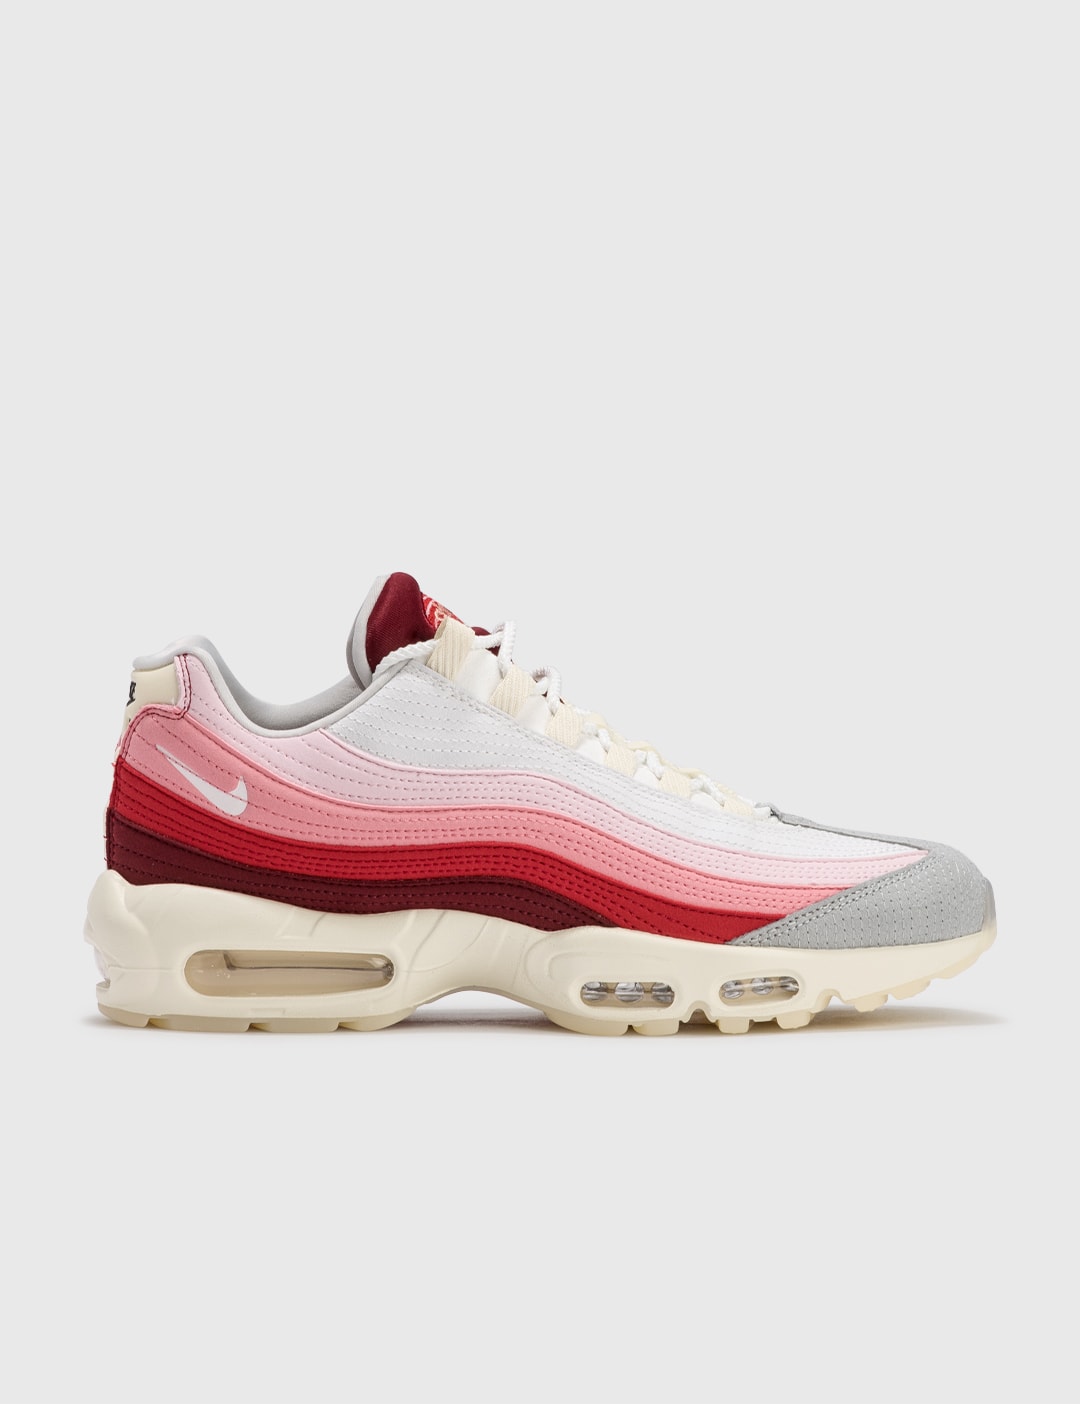 Nike - Nike Air Max 95 “Anatomy of Air” | HBX Globally Curated Fashion Lifestyle by